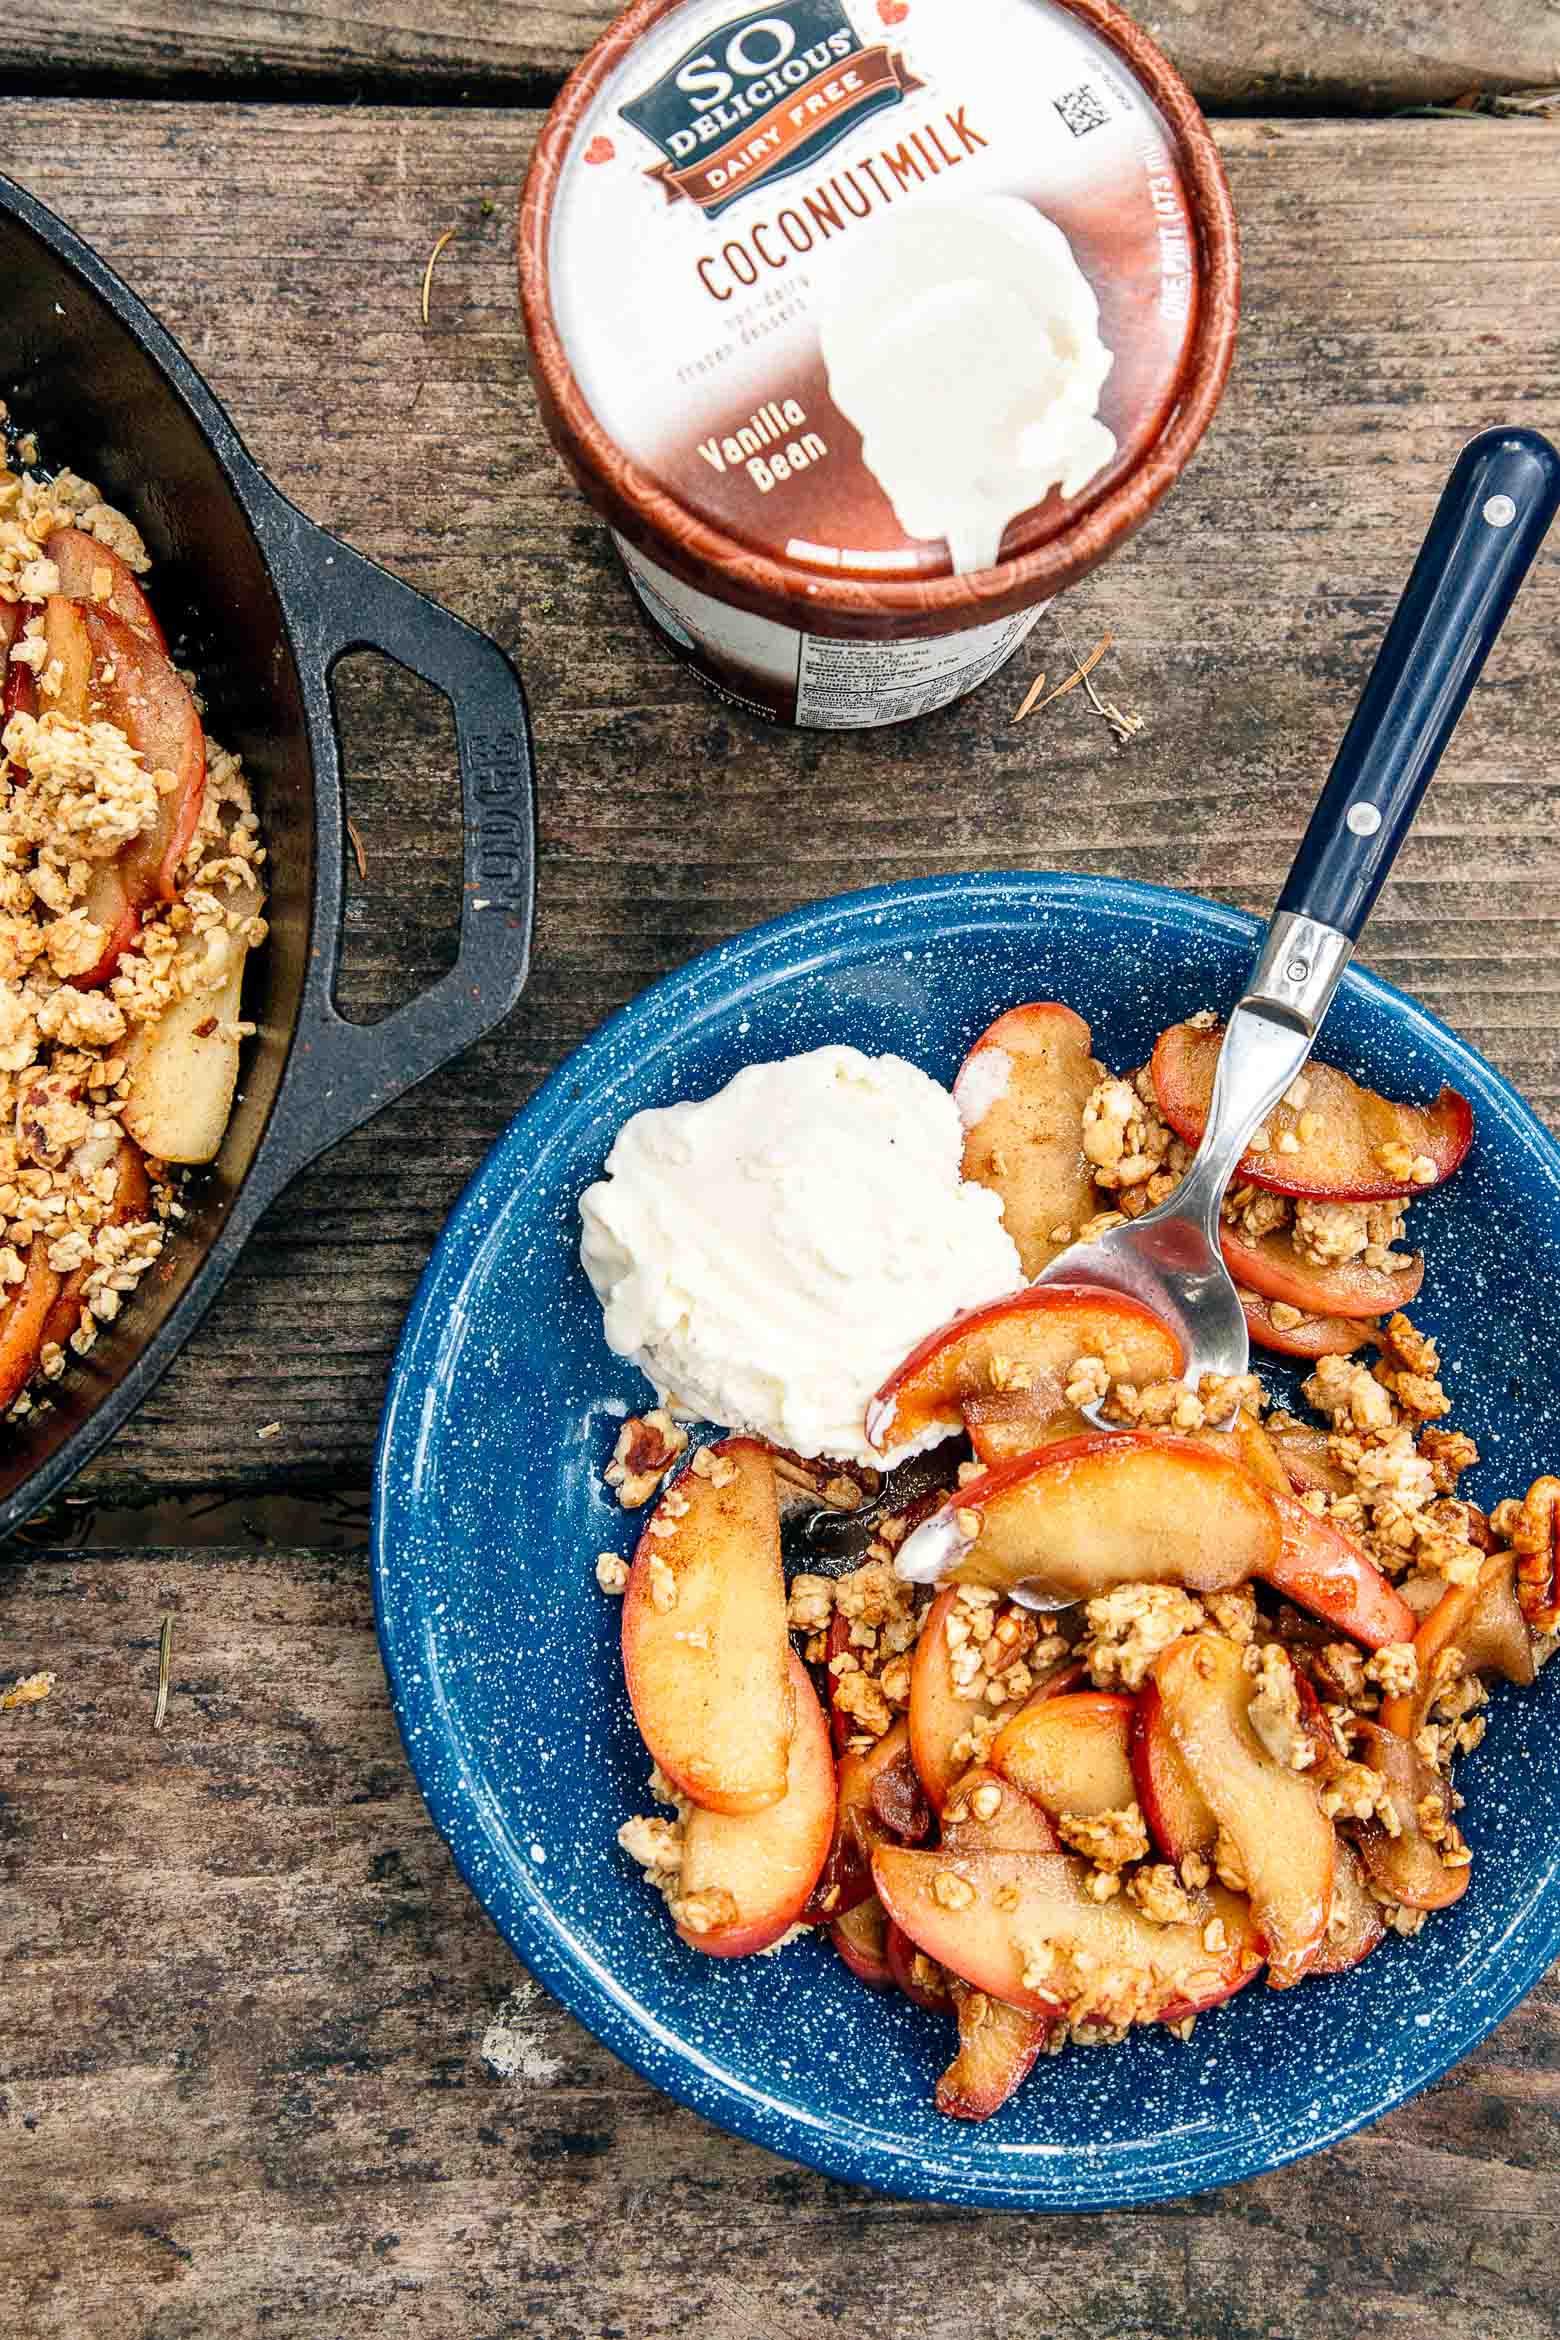 Apple crisp in a blue camping bowl with a scoop of ice cream.